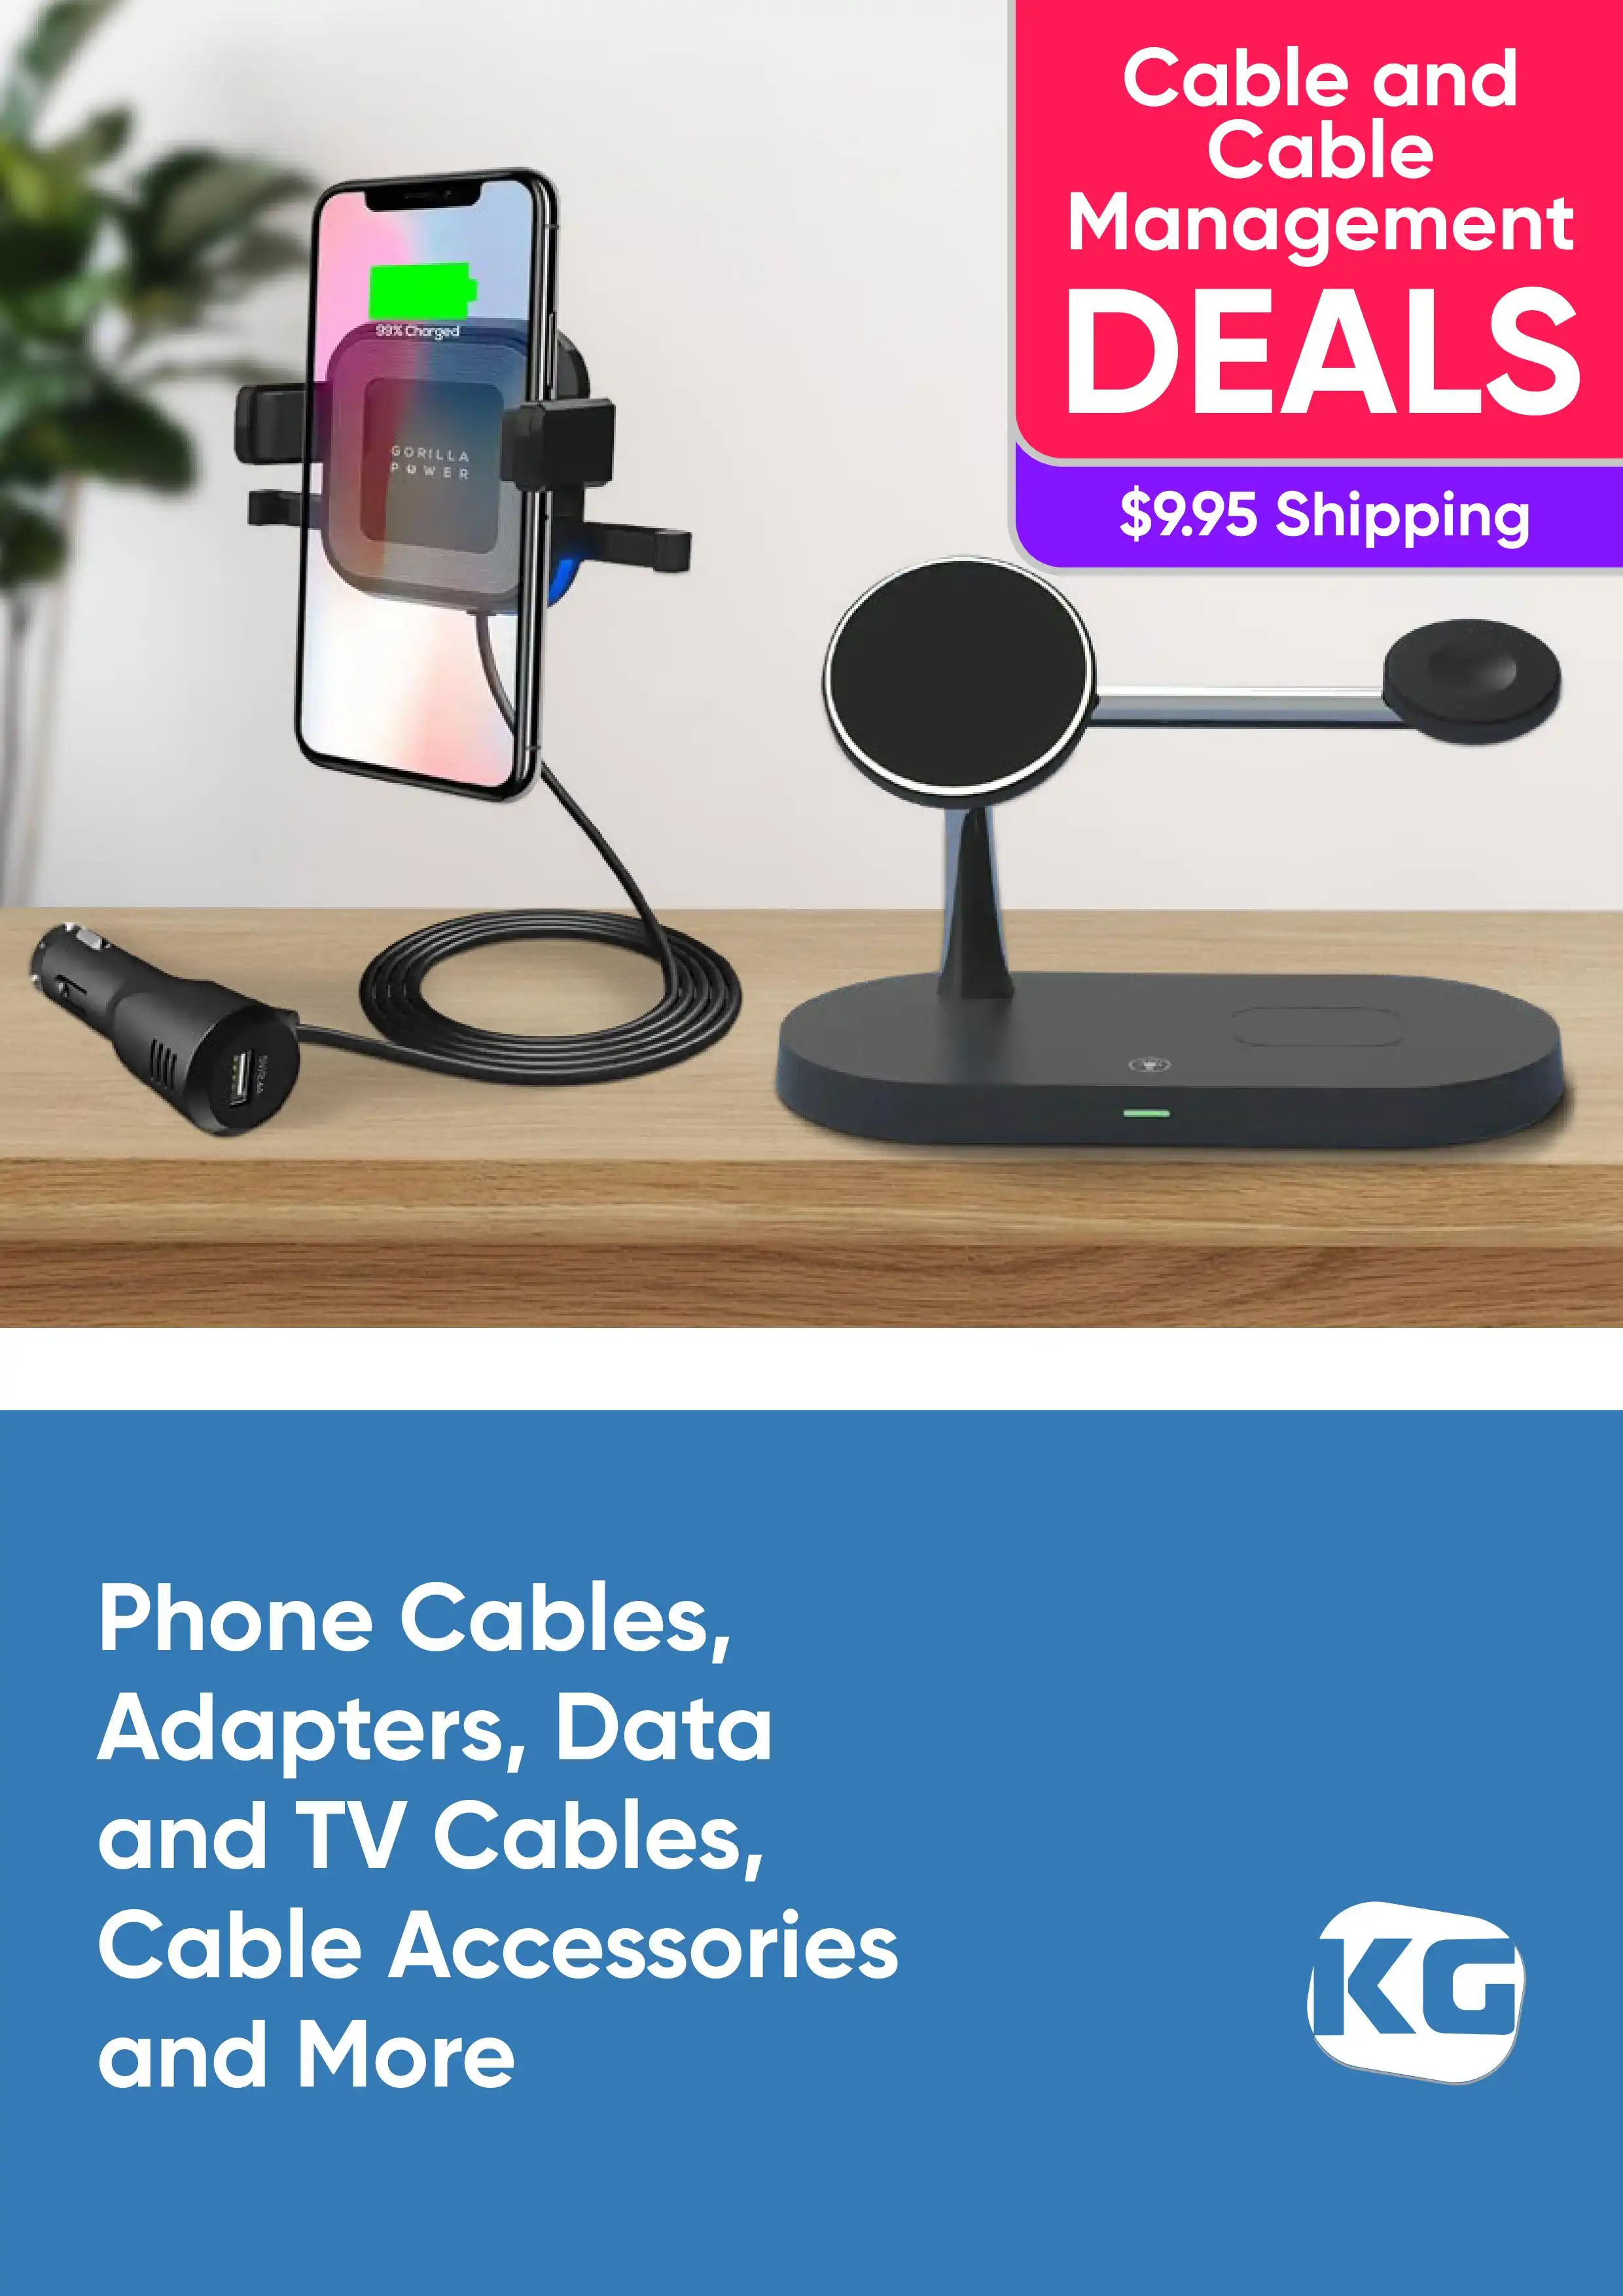 Phone Cables, Adapters, Data and TV Cables, Cable Accessories and More